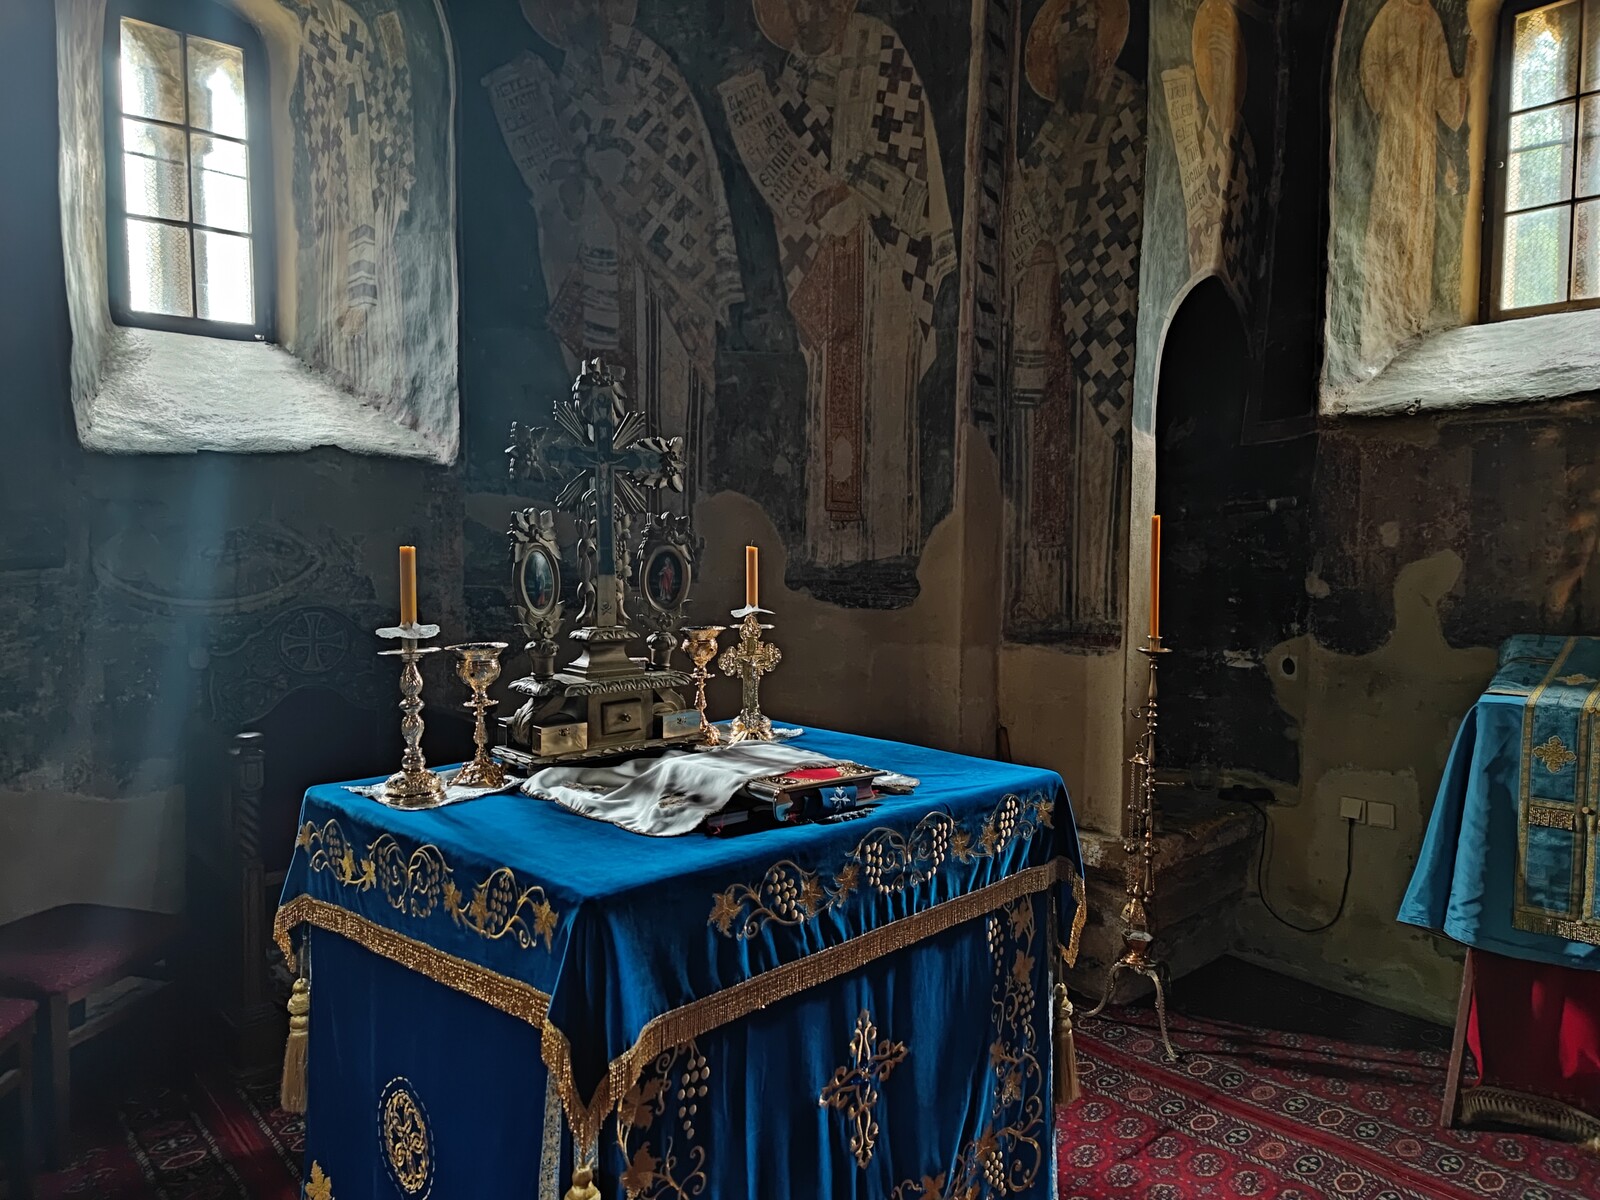 View of the Sanctuary and the Altar Table